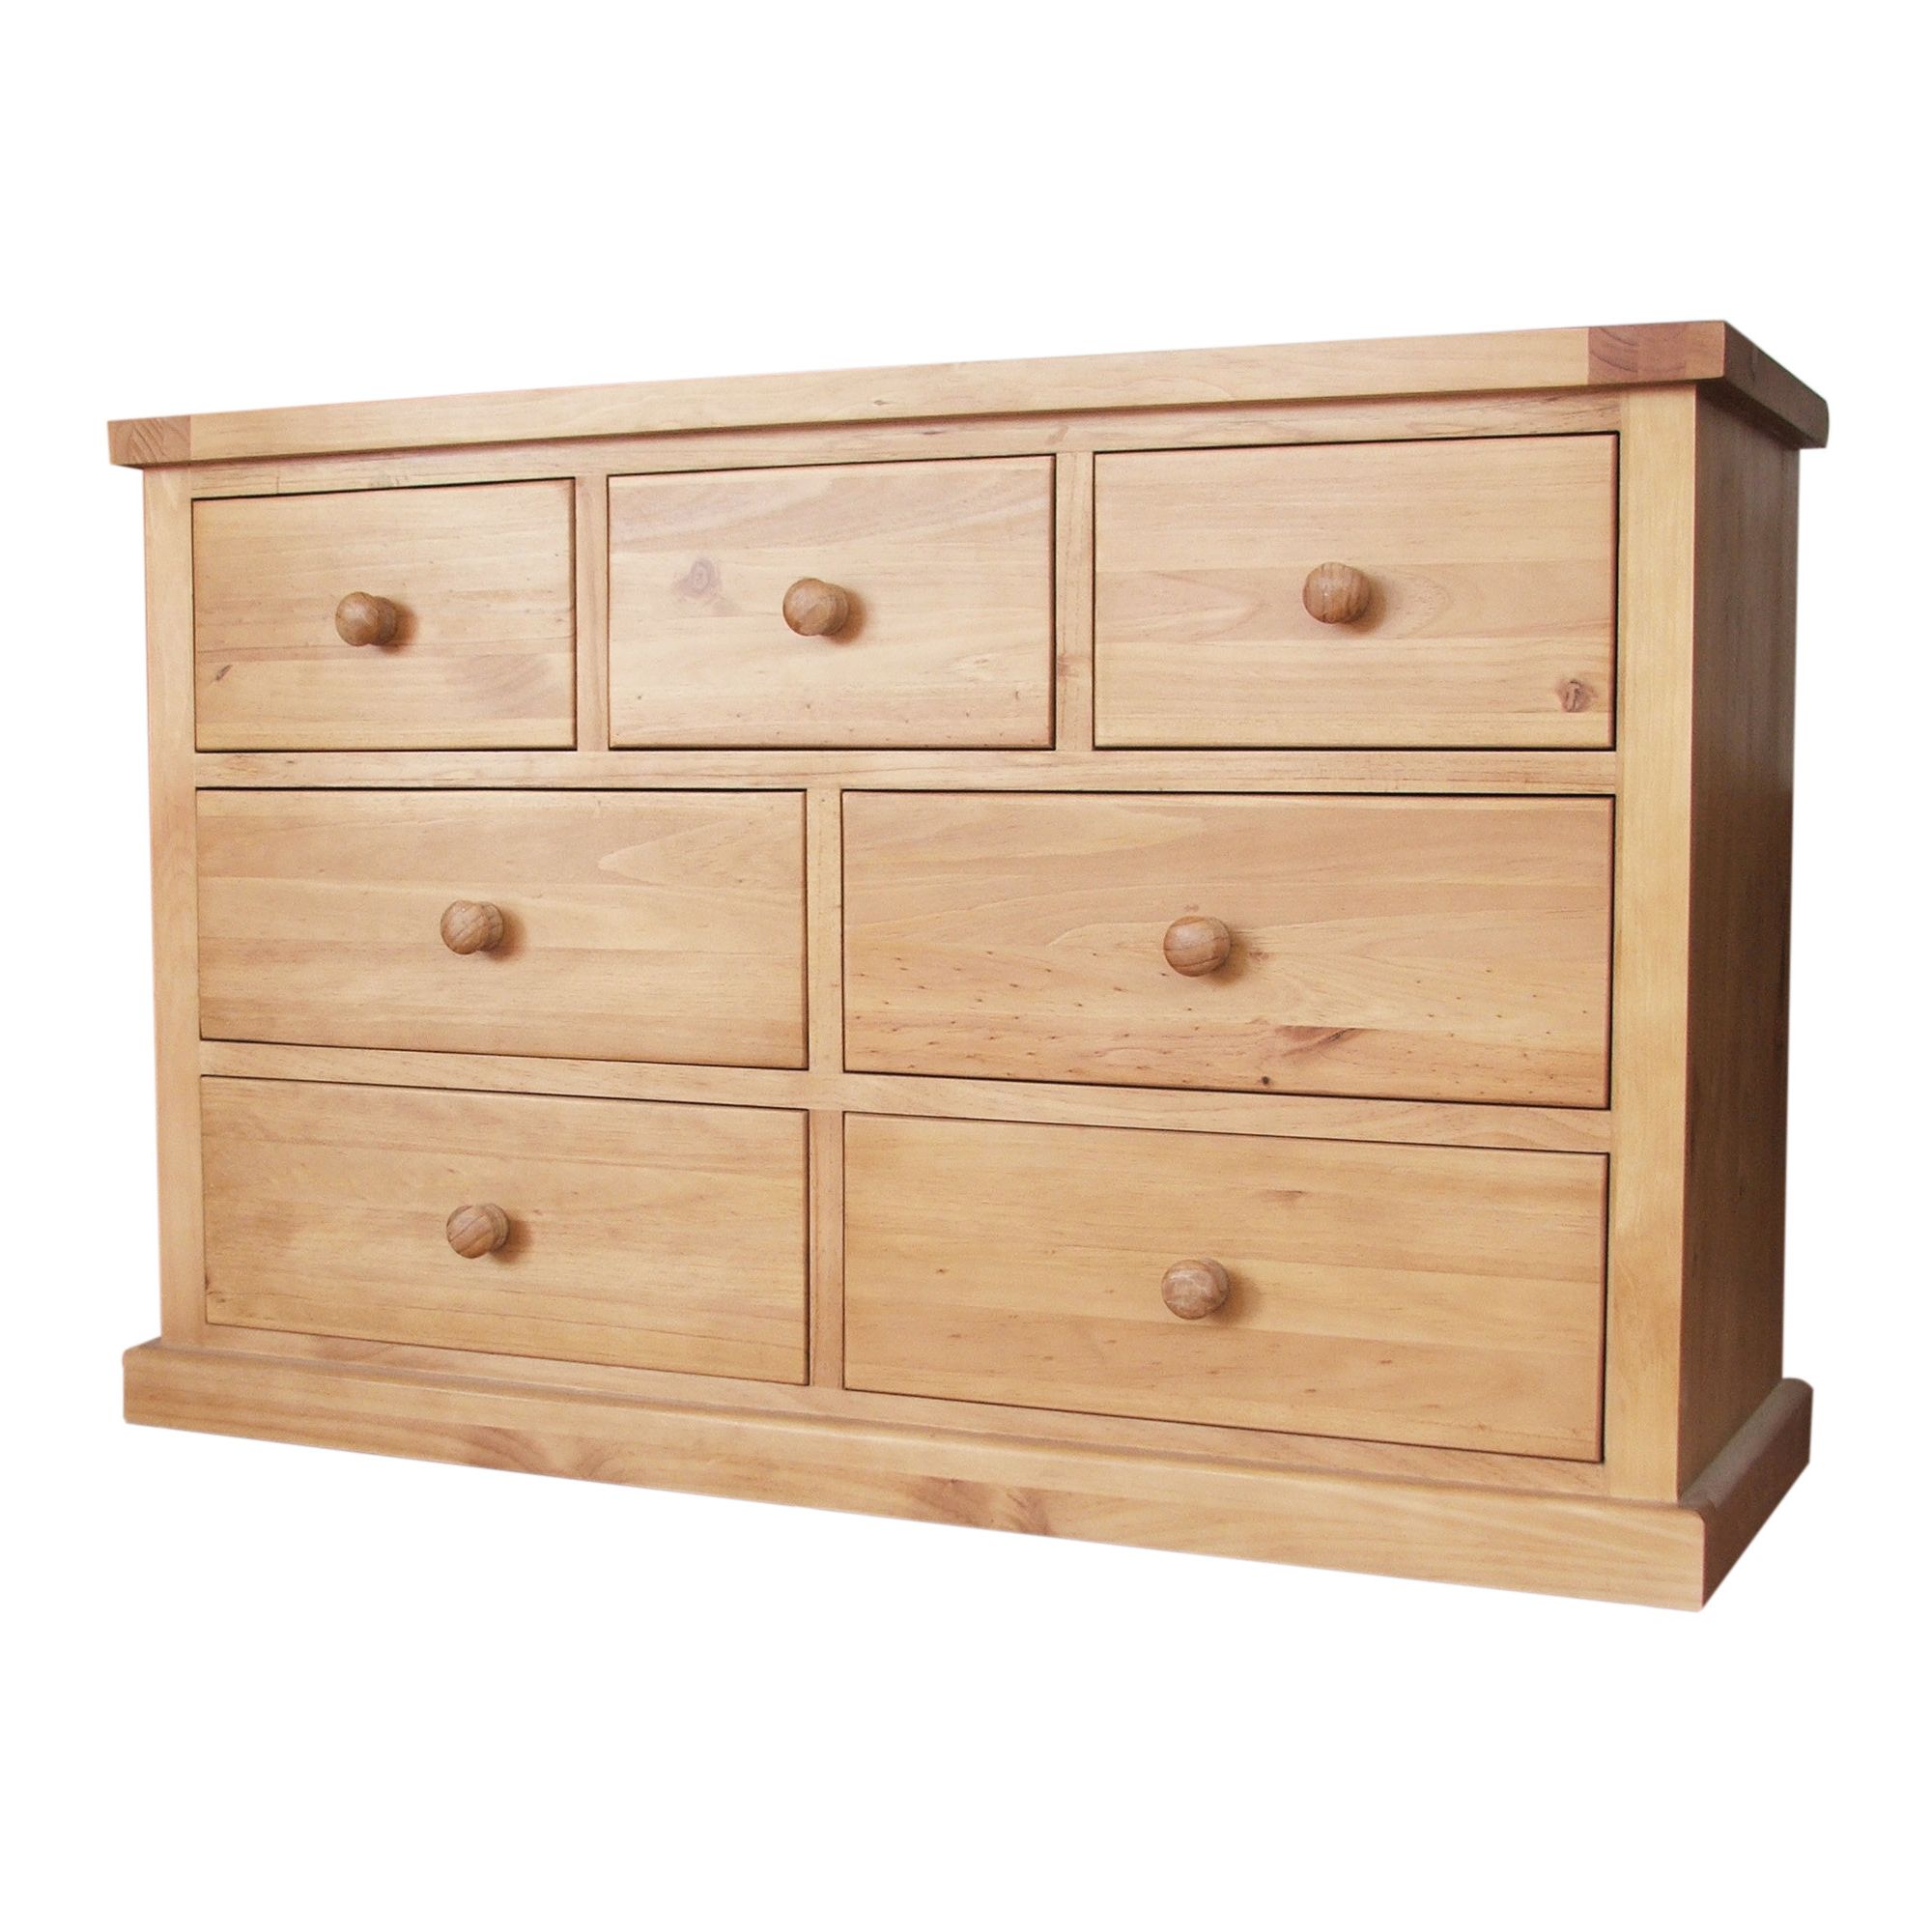 Thorndon Kempton Bedroom Seven Drawer Multi Chest in Hand Waxed at Tesco Direct